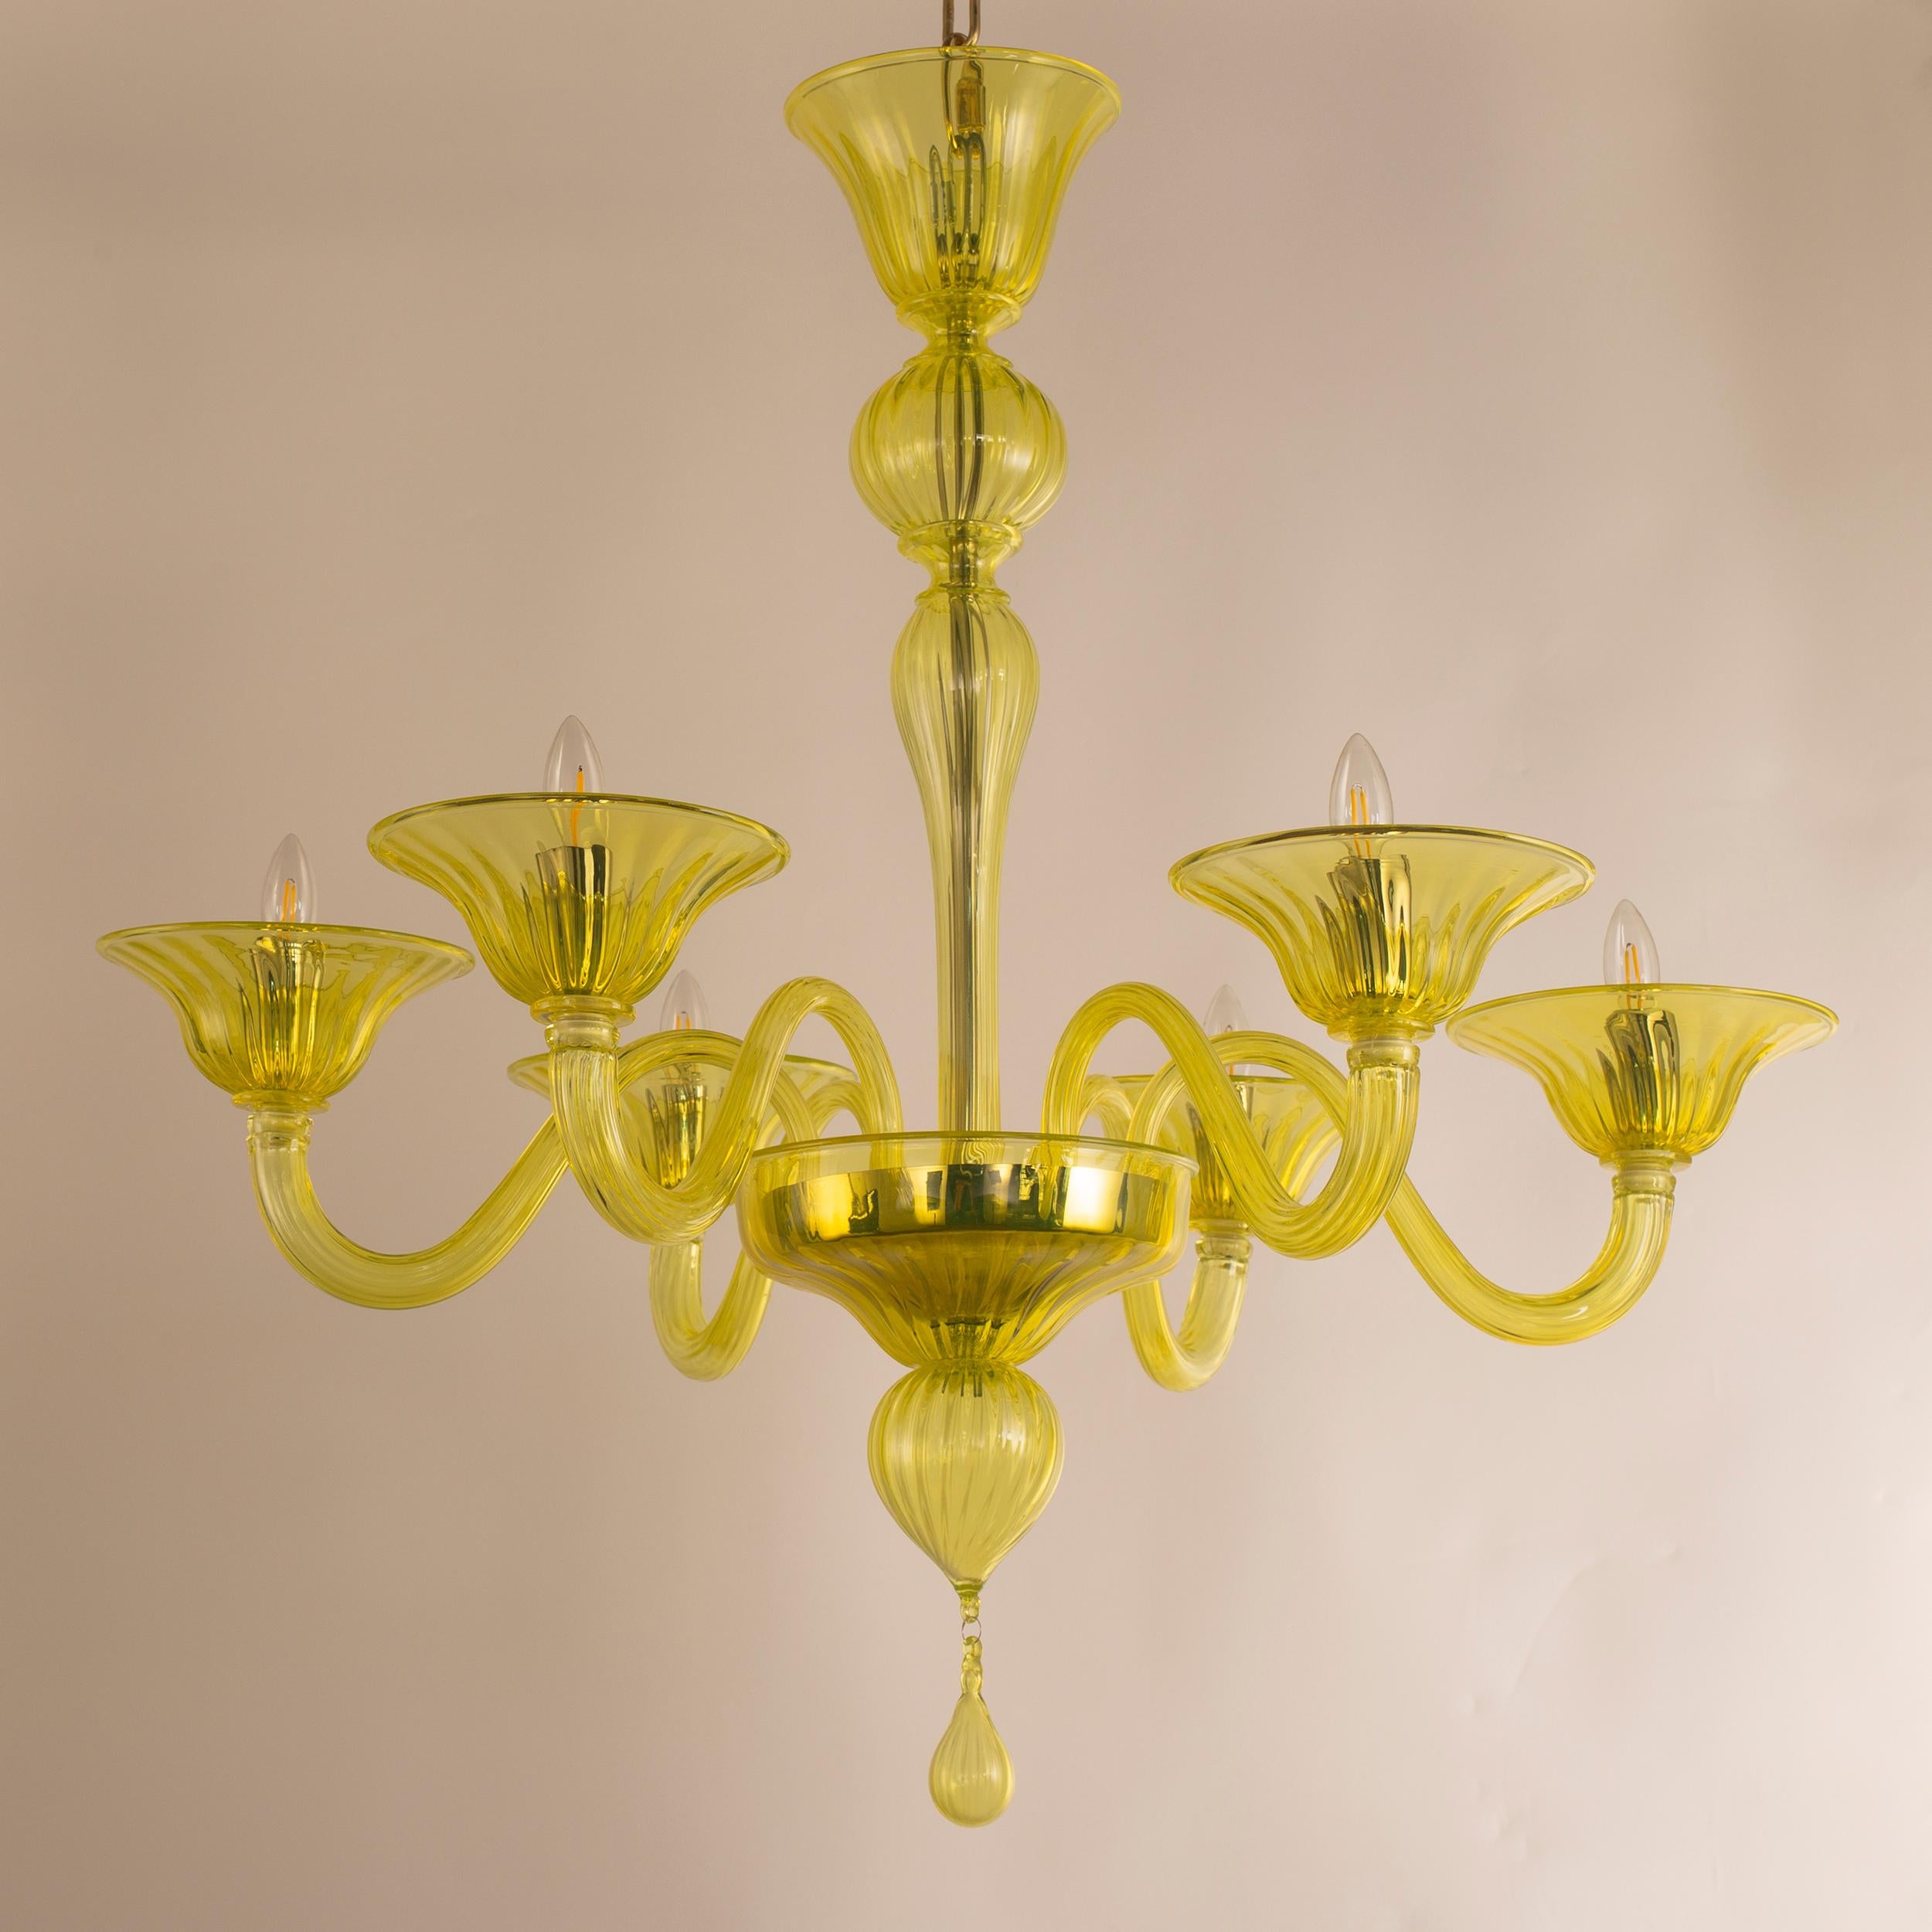 Simplicissimus Chandelier, 6 lights, Yellow Murano Glass by Multiforme In New Condition For Sale In Trebaseleghe, IT